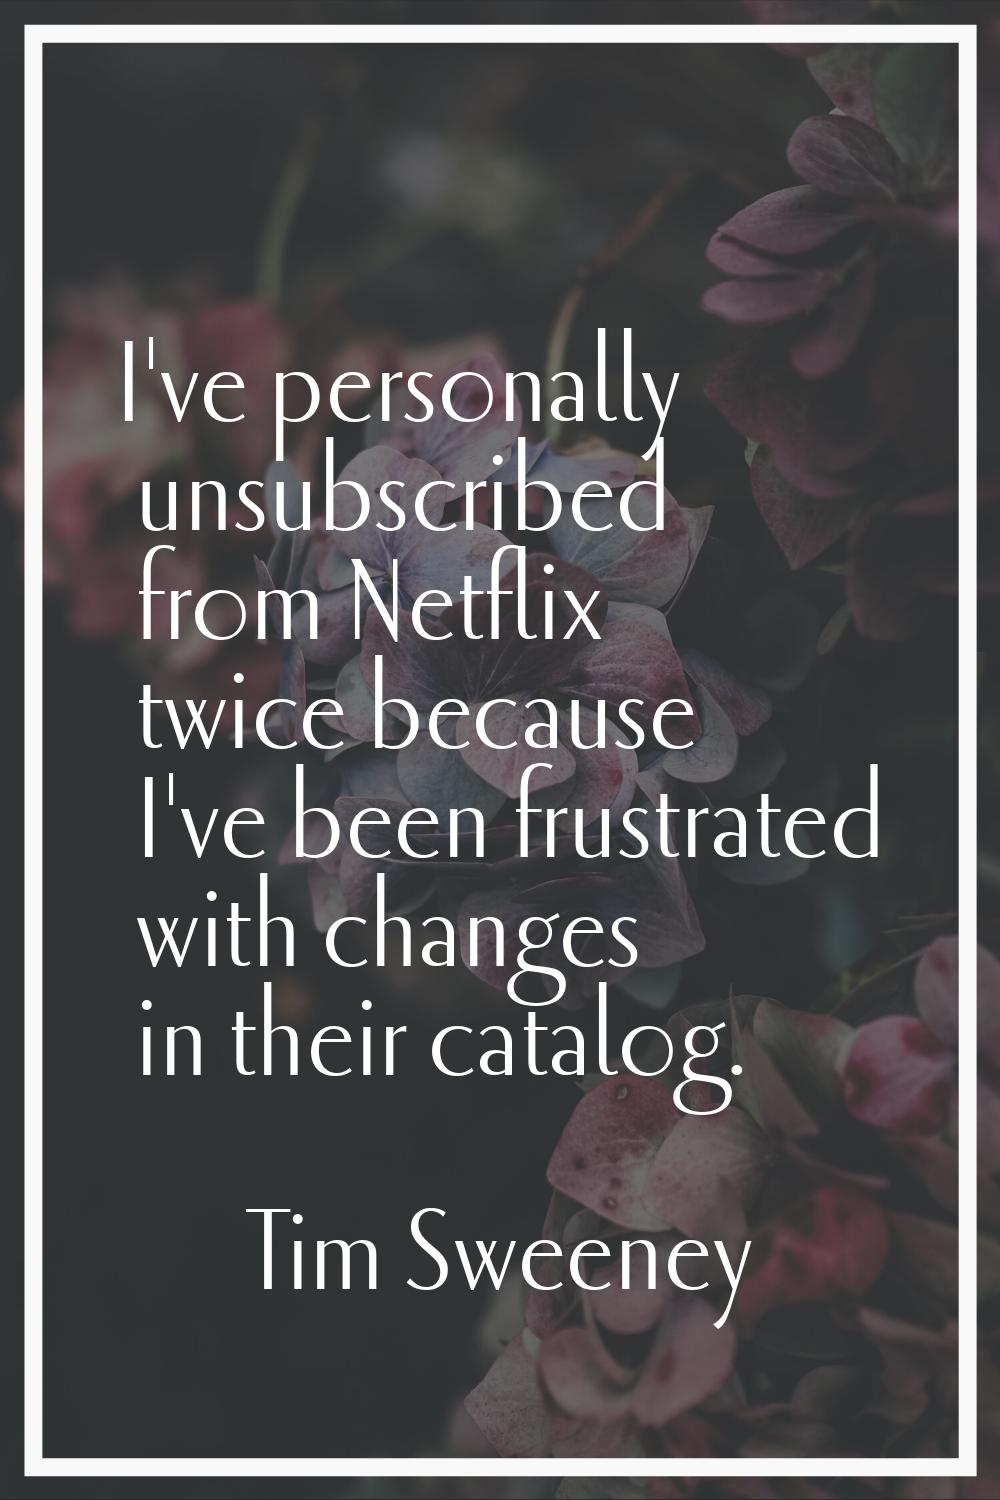 I've personally unsubscribed from Netflix twice because I've been frustrated with changes in their 